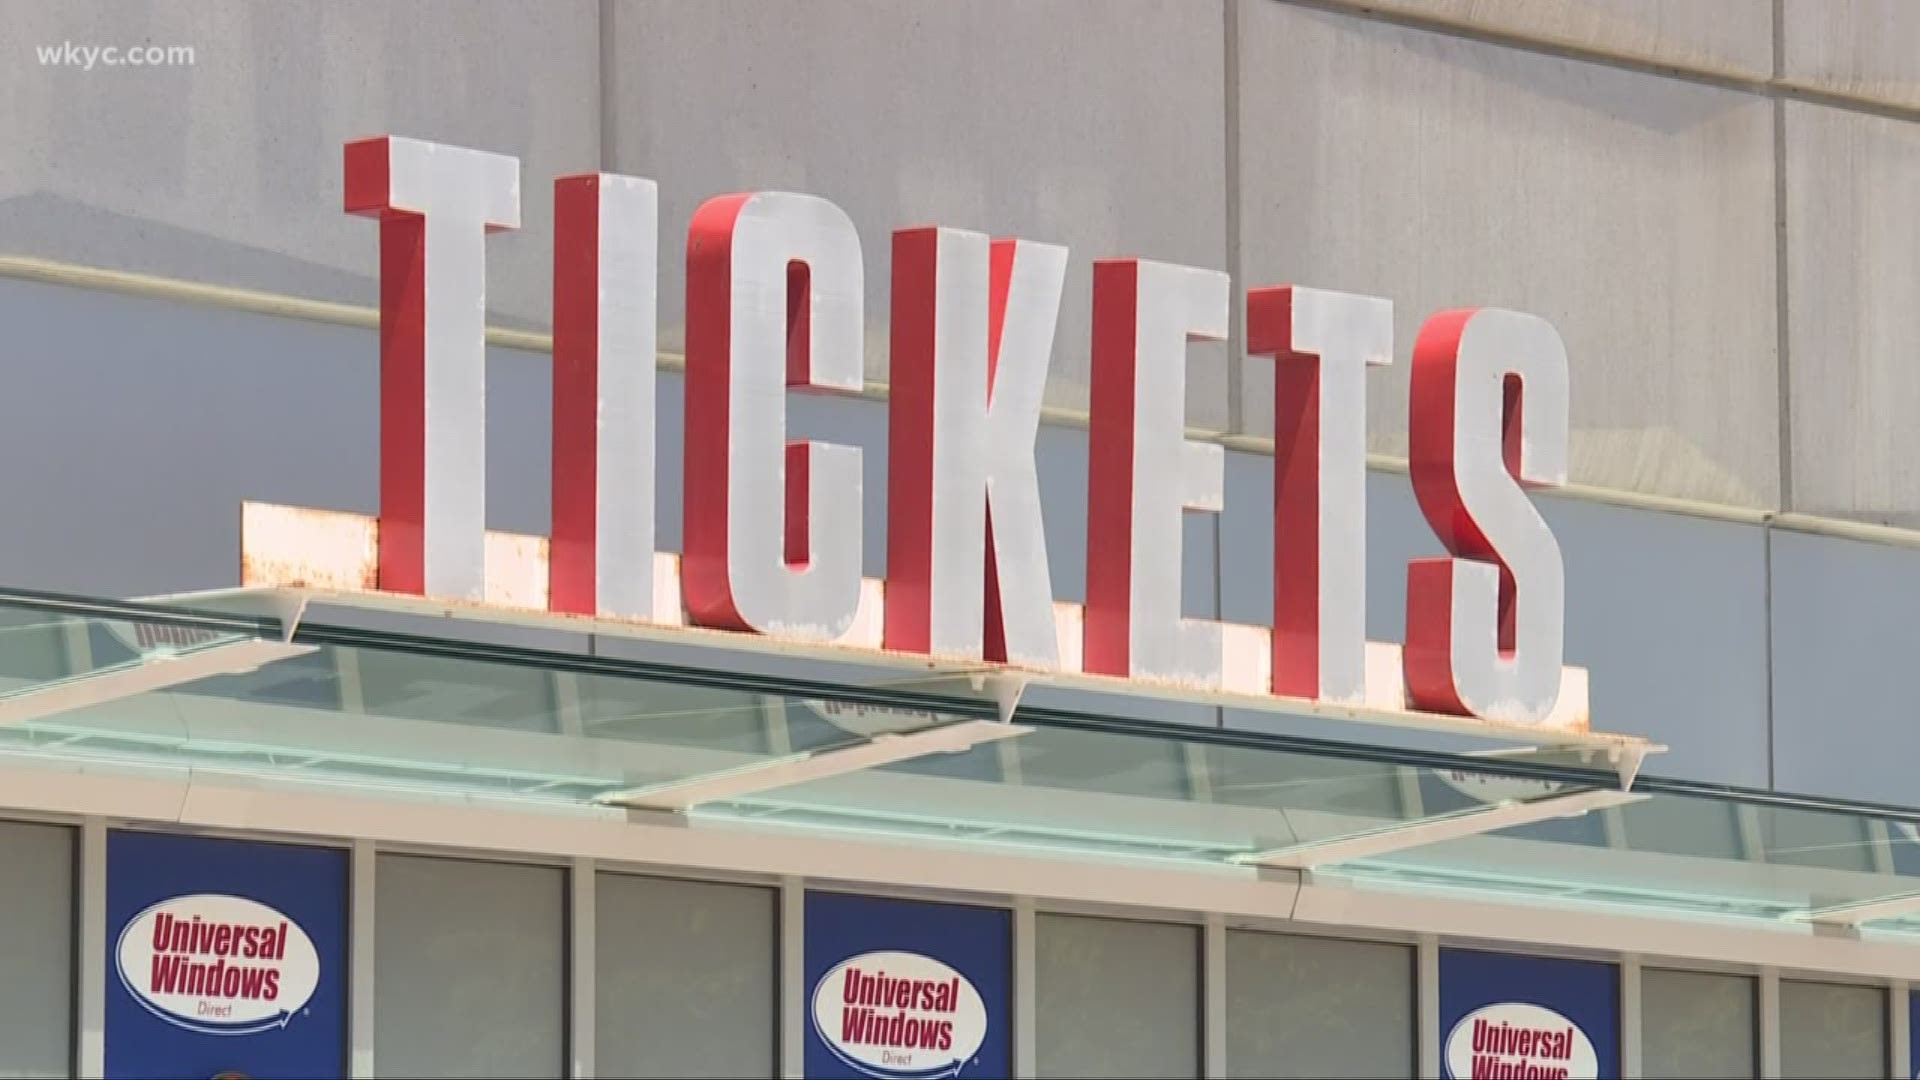 Cleveland Browns single game tickets sell out in a blast!